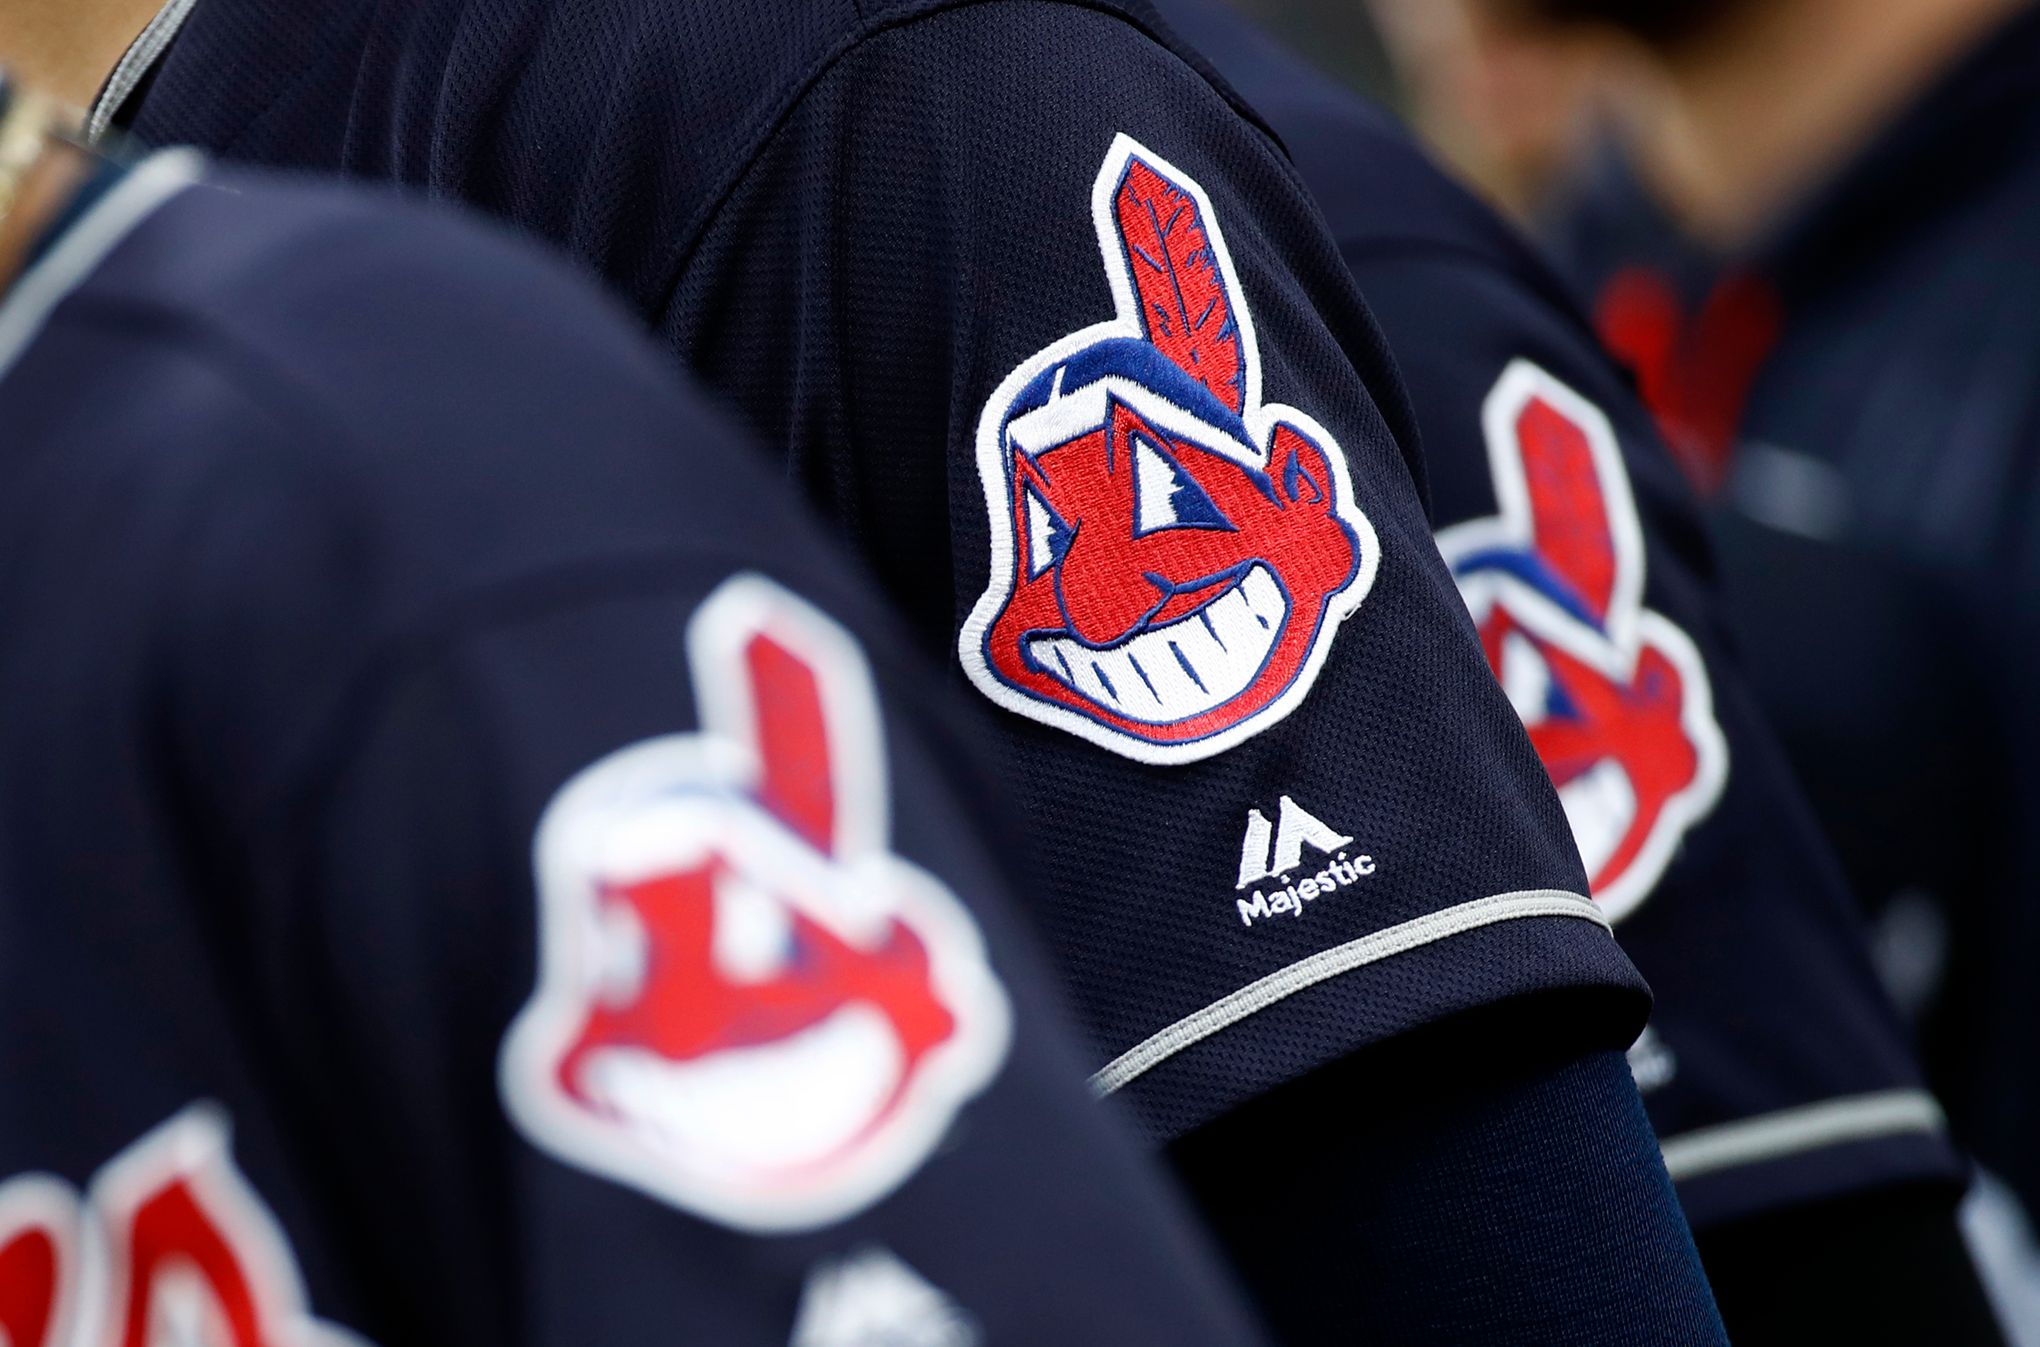 Cleveland Indians unveil their first new uniforms without Chief